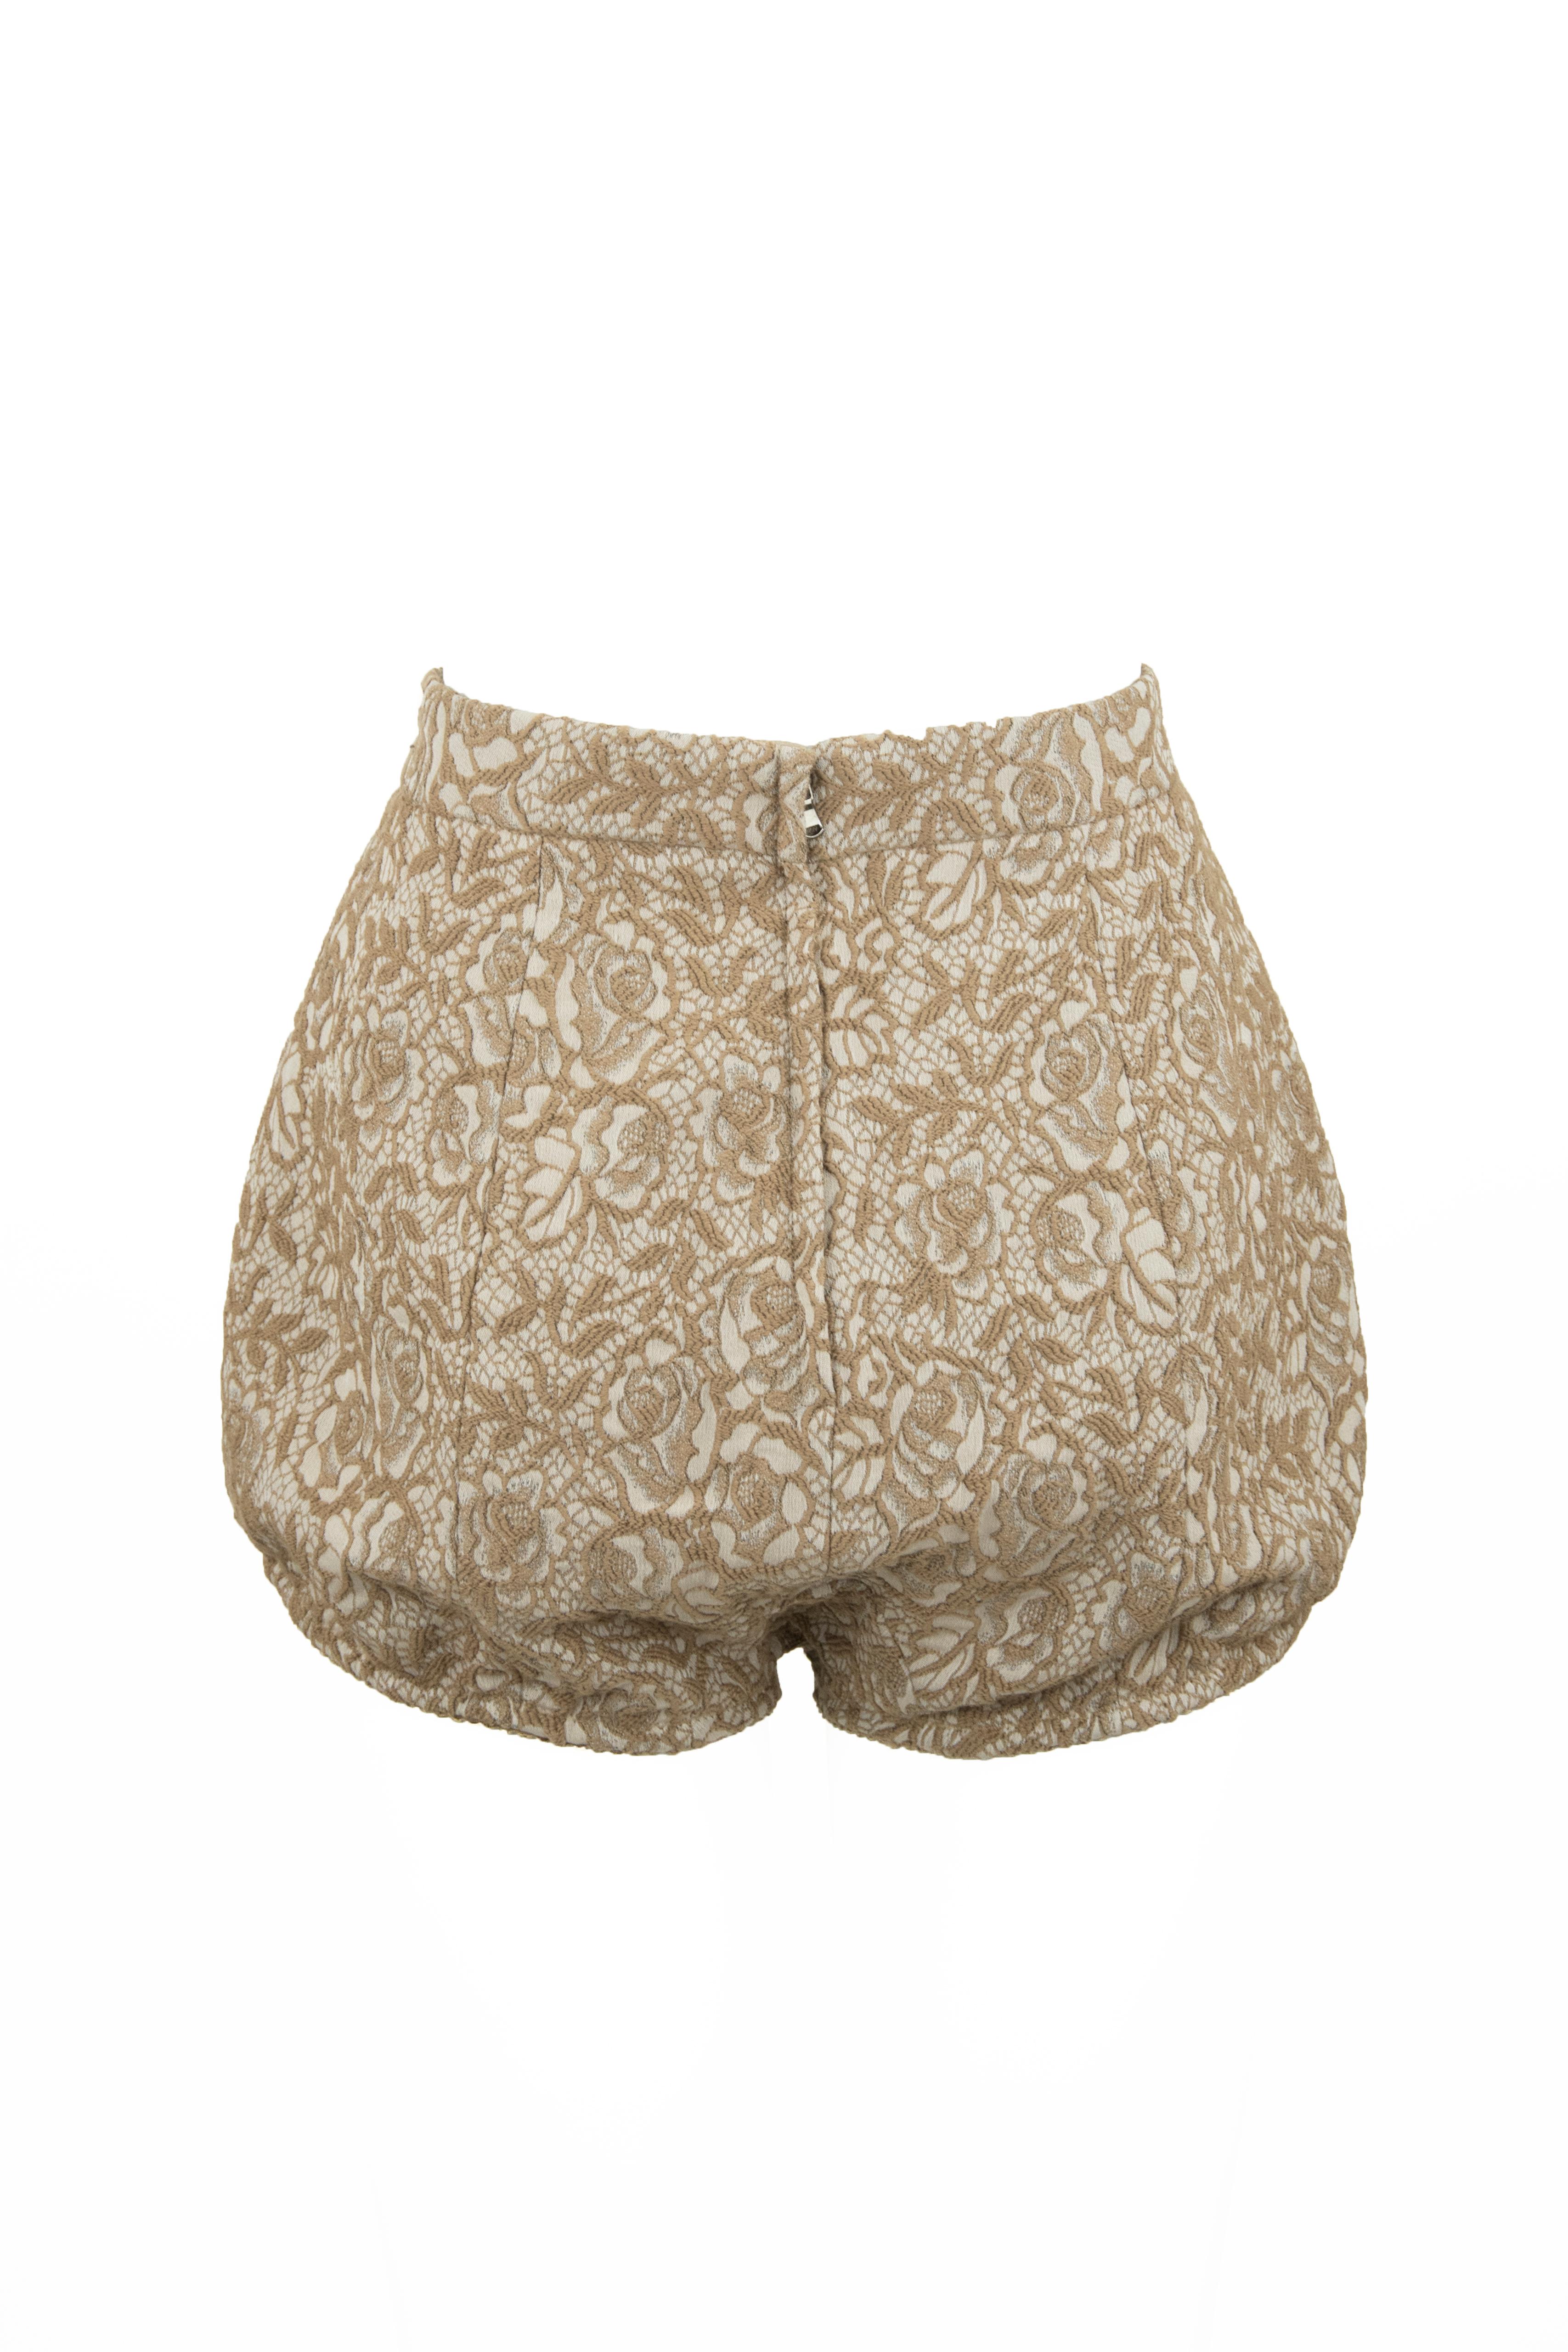 Dolce & Gabbana lace jacquard hot pants that are perfect for a leggy look.  Gorgeous embroidered fabric that creates a lace effect.

Size: IT 40

Condition: Pristine

Made in Italy